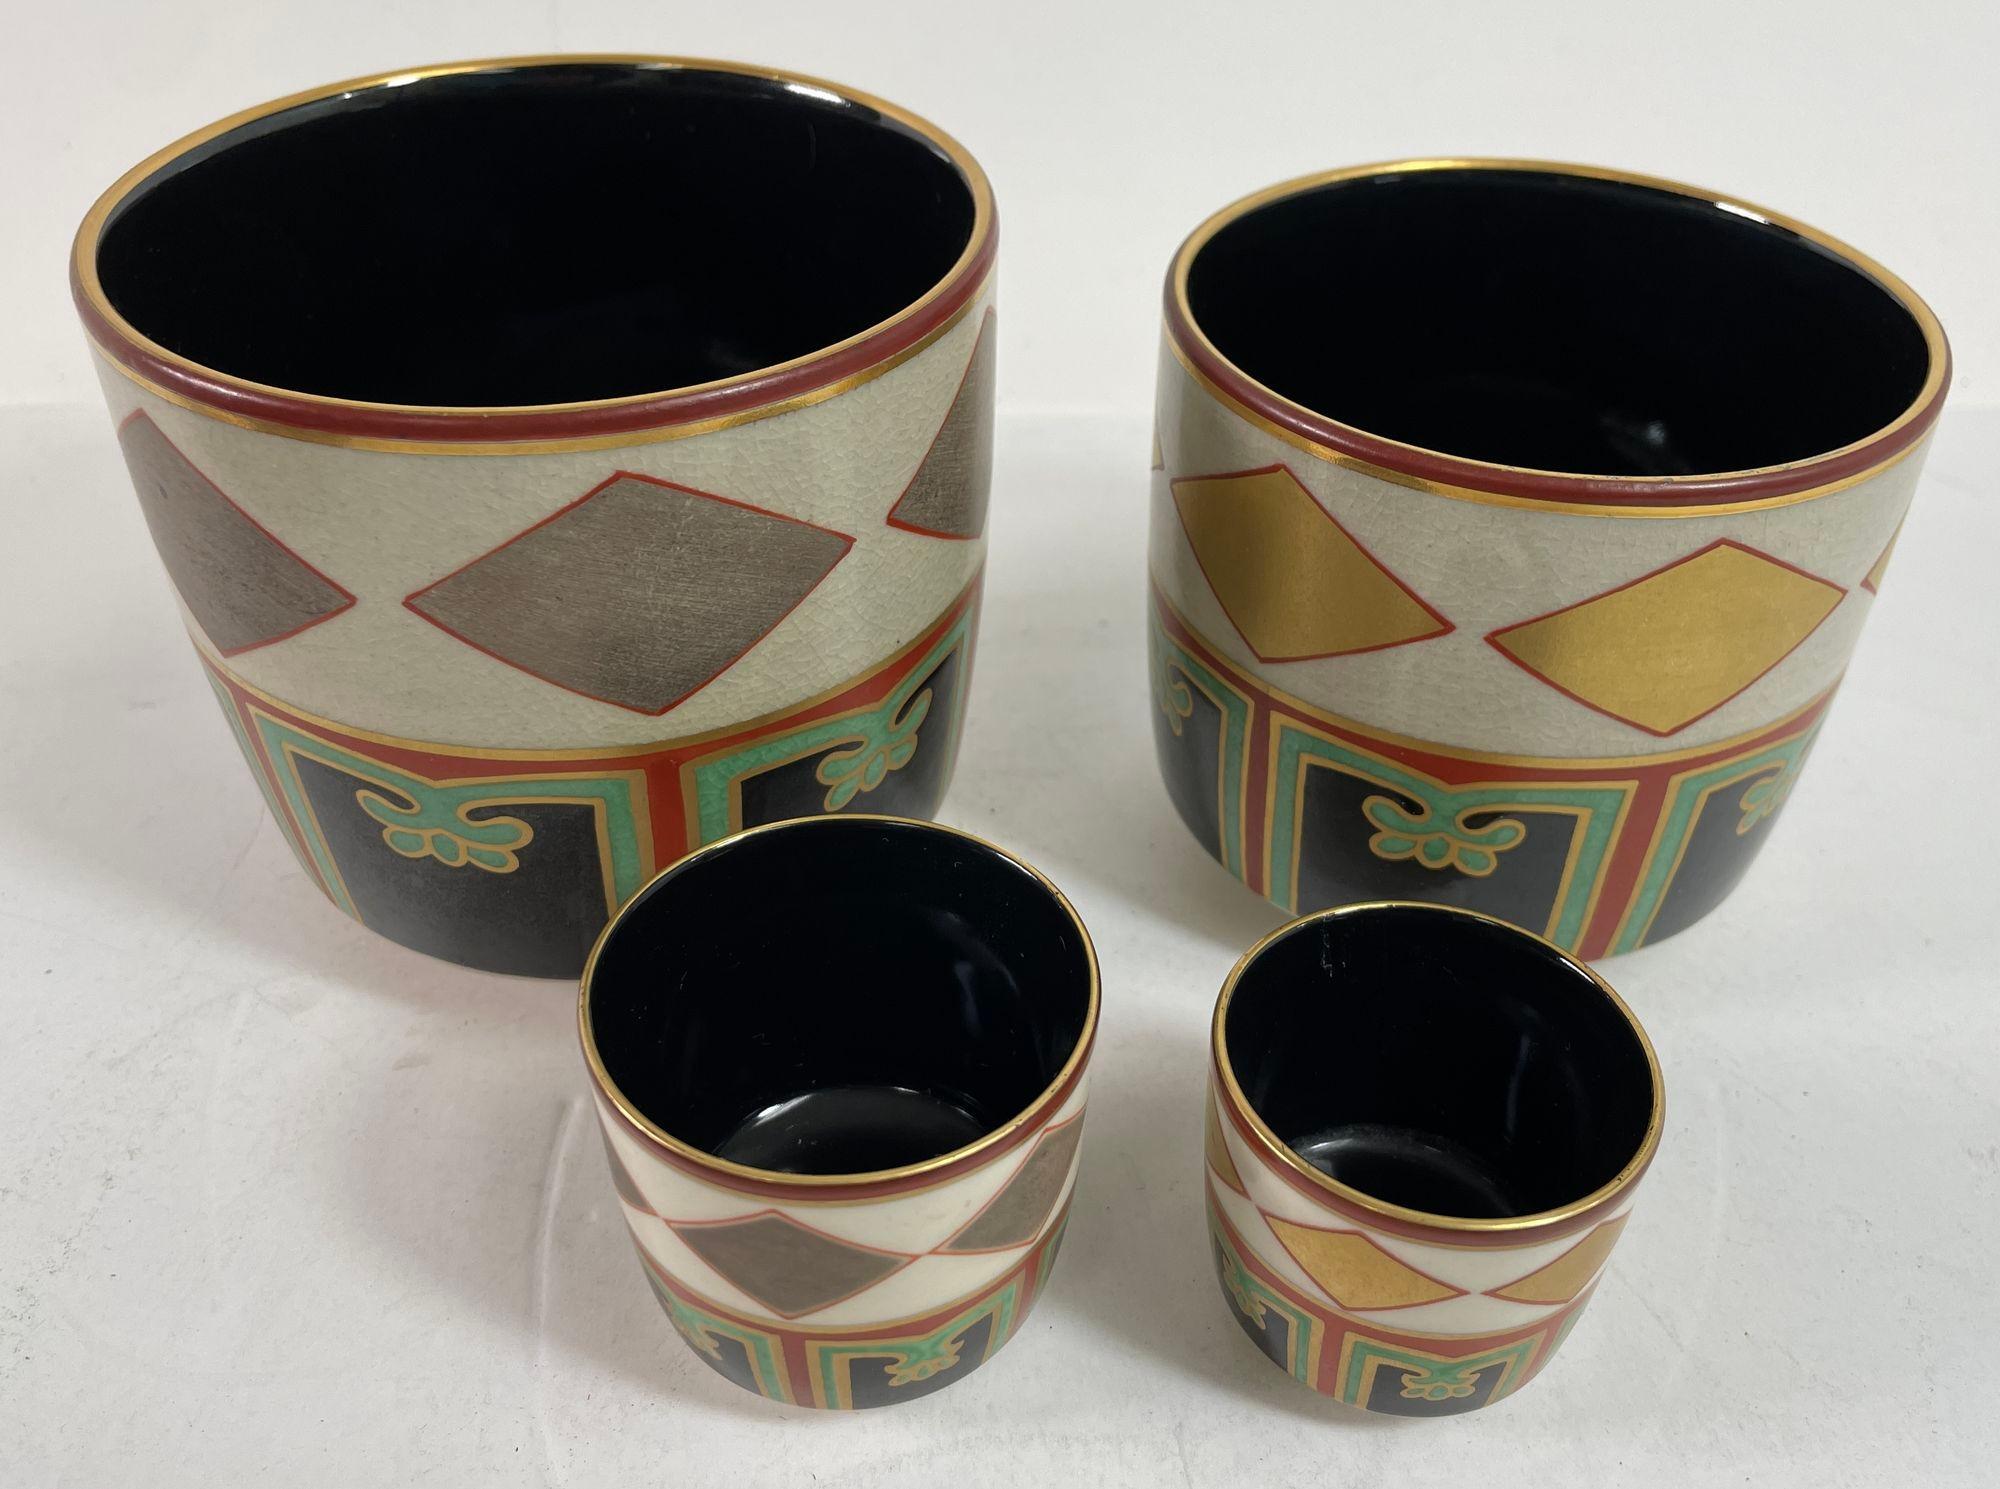 Vintage Kuniyaki Tea Bowls and Tray Set After Nonomura Ninsei Japan.
Kuniyaki tea bowls set, after Ninsei.
Kuniyaki Tea Bowls and Tray Japan black porcelain inside and decorated with gold, red, green and silver.
The set comprised of 4 bowls in